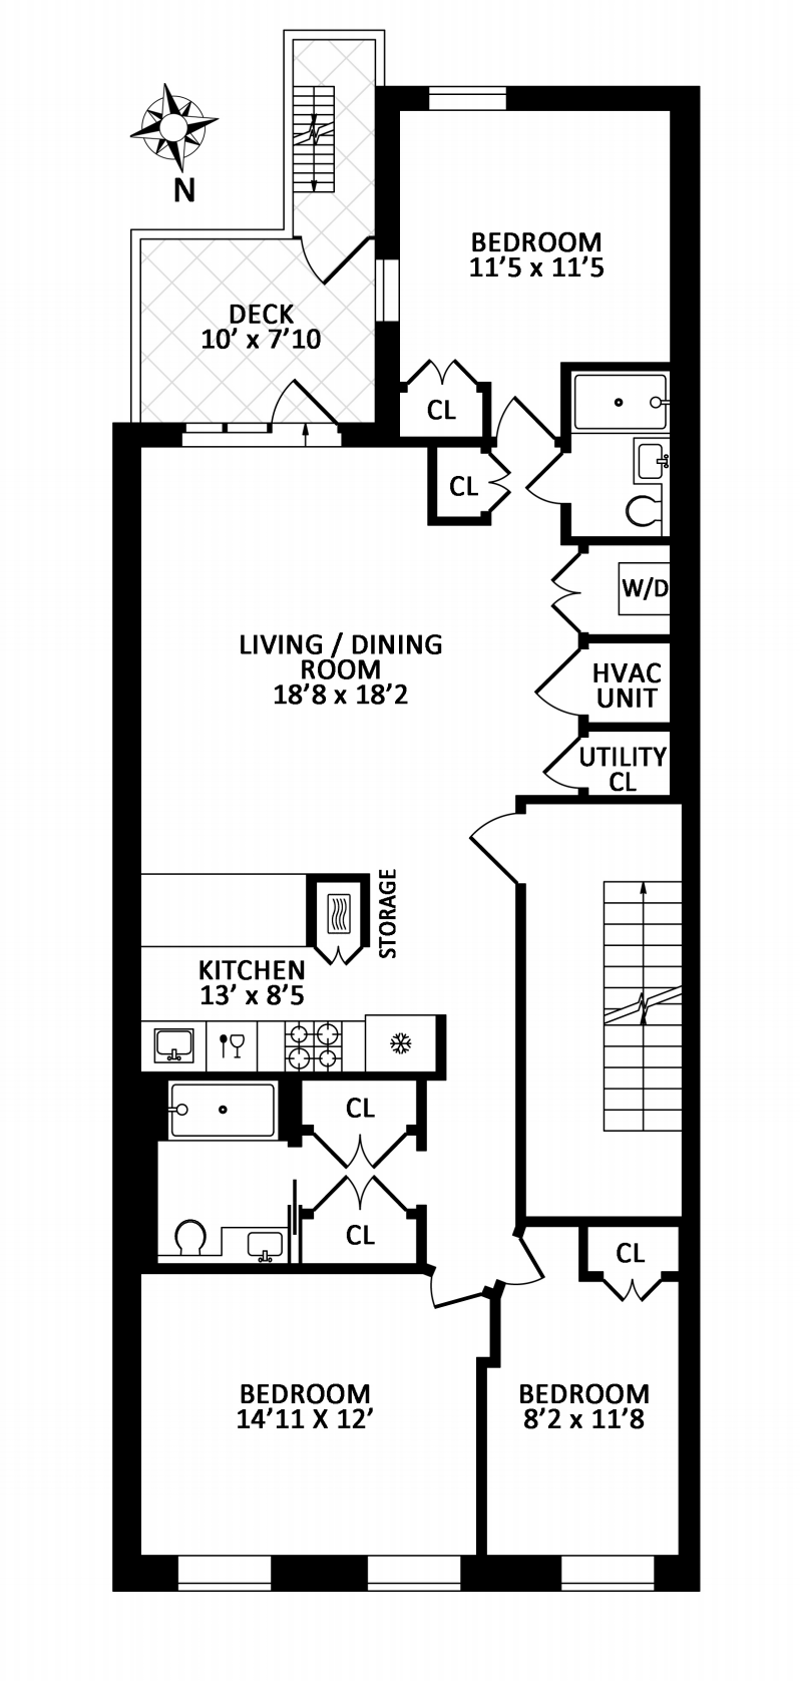 Floorplan for 132 2nd Place, 4